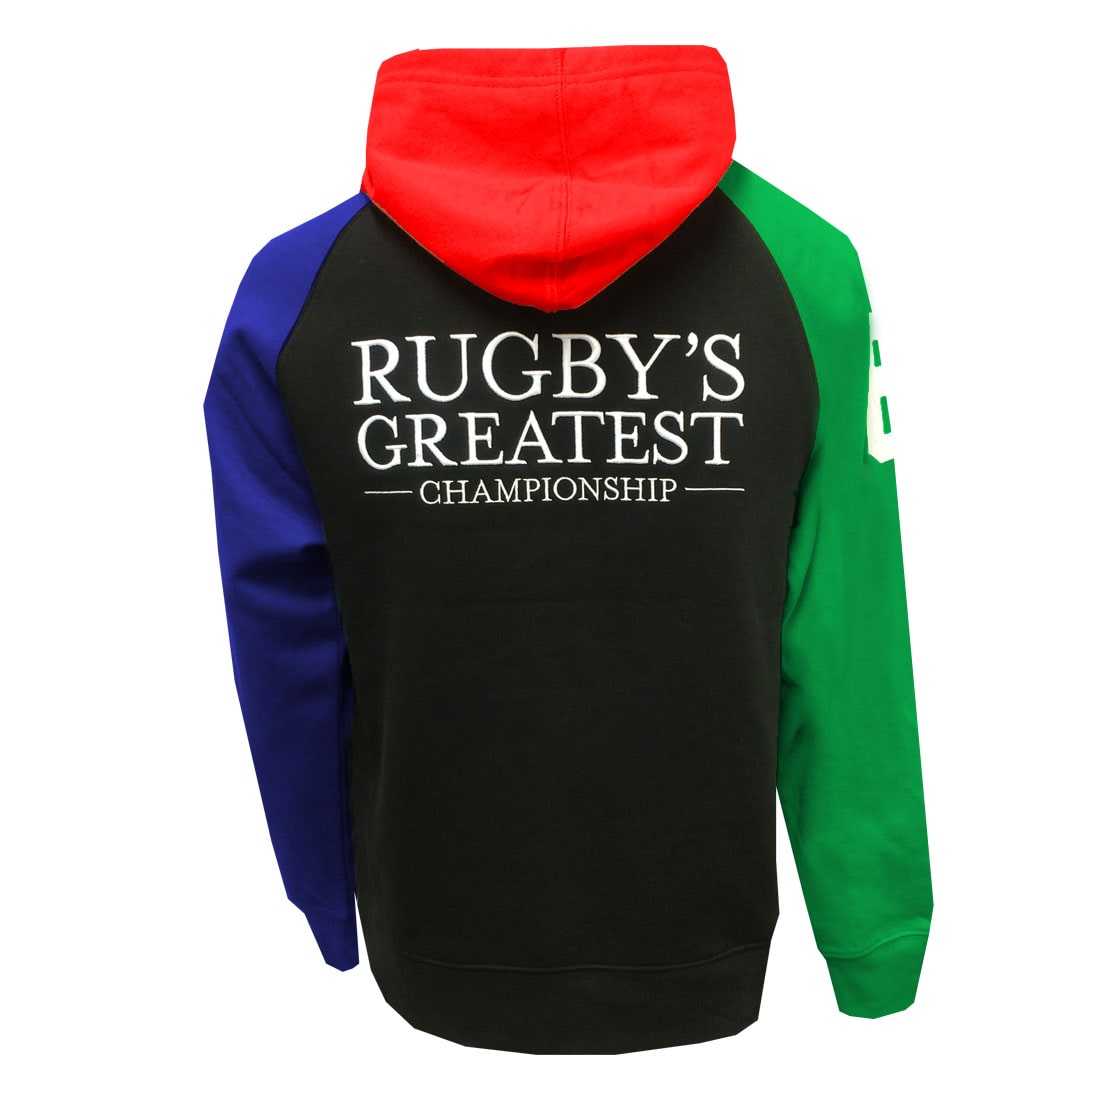 Introducing the ultimate Six Nations Colour Block Hoodie from Guinness UK, the perfect combination of style and comfort. This colour block hoodie is a must-have for any rugby enthusiast.